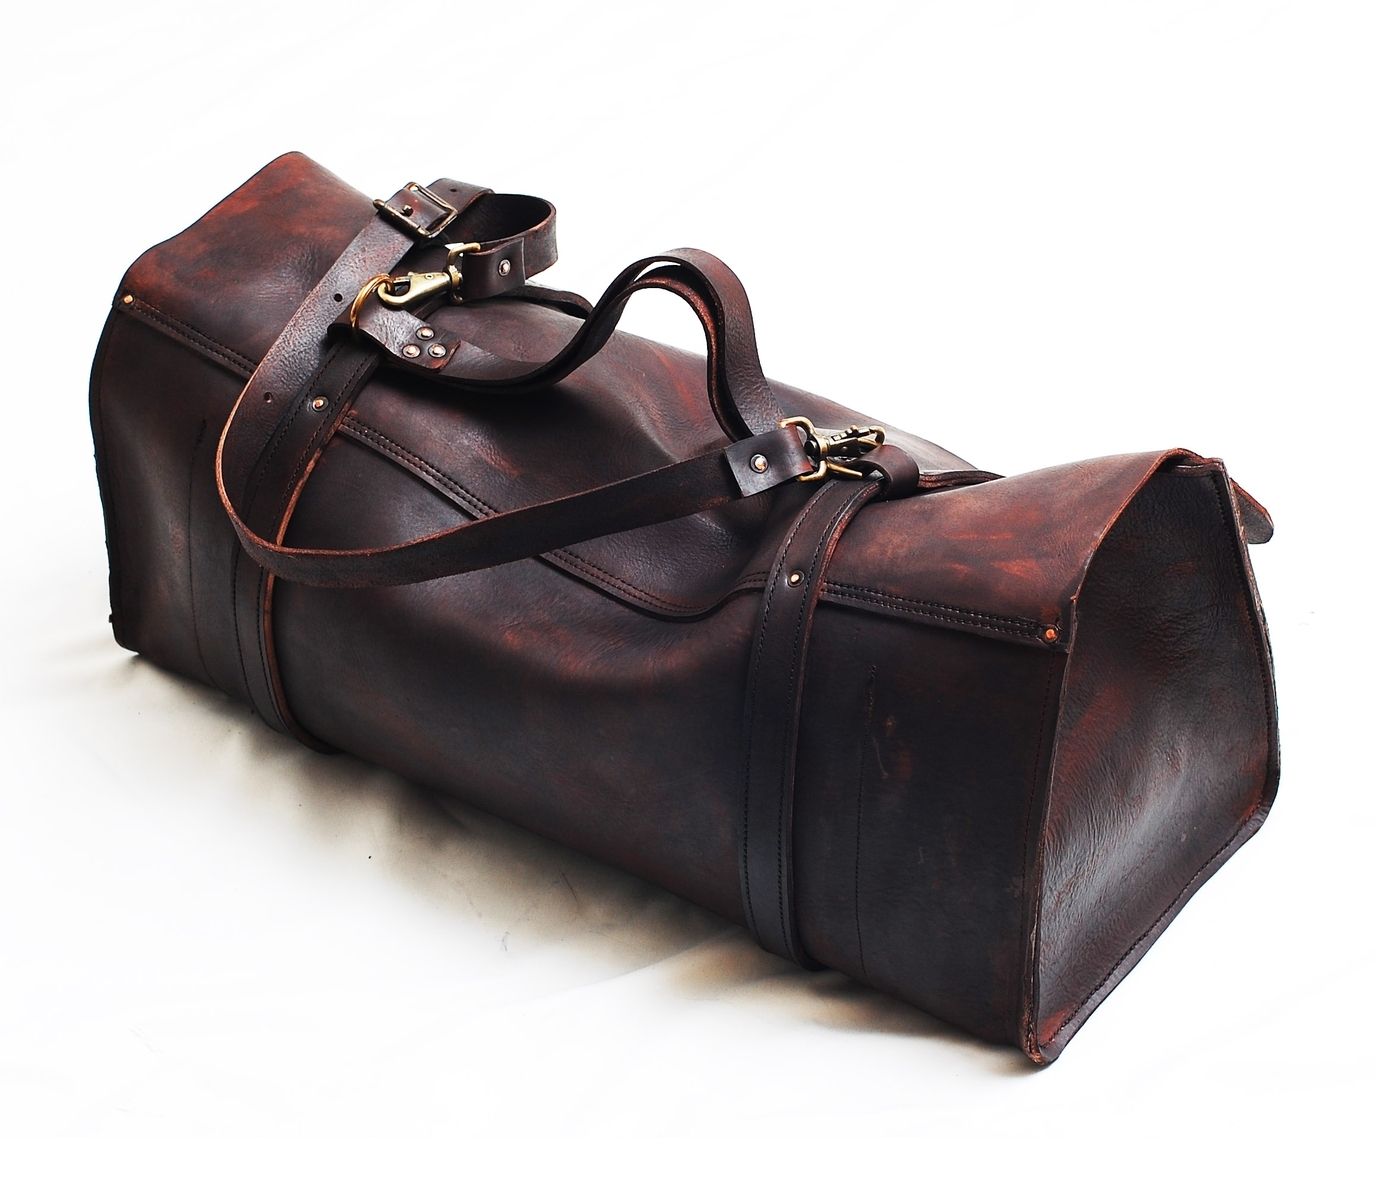 Hand Crafted Duffle Bag by Sizzlestrapz | CustomMade.com